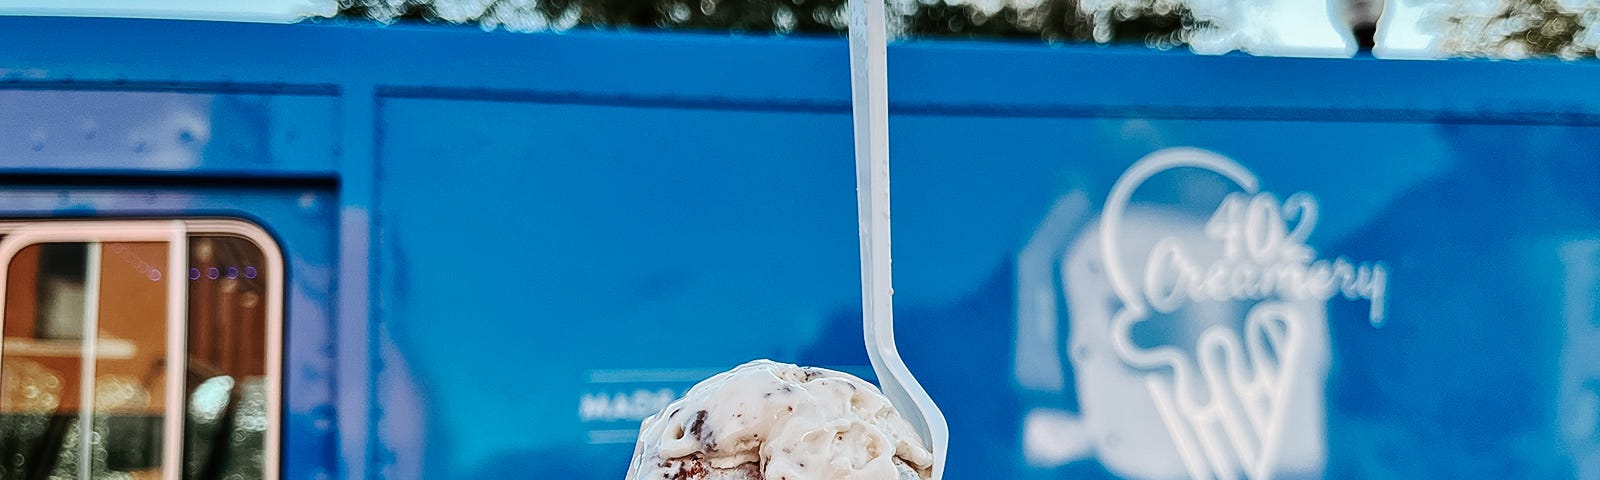 A scoop of 402 Creamery ice cream held up in front of their food truck